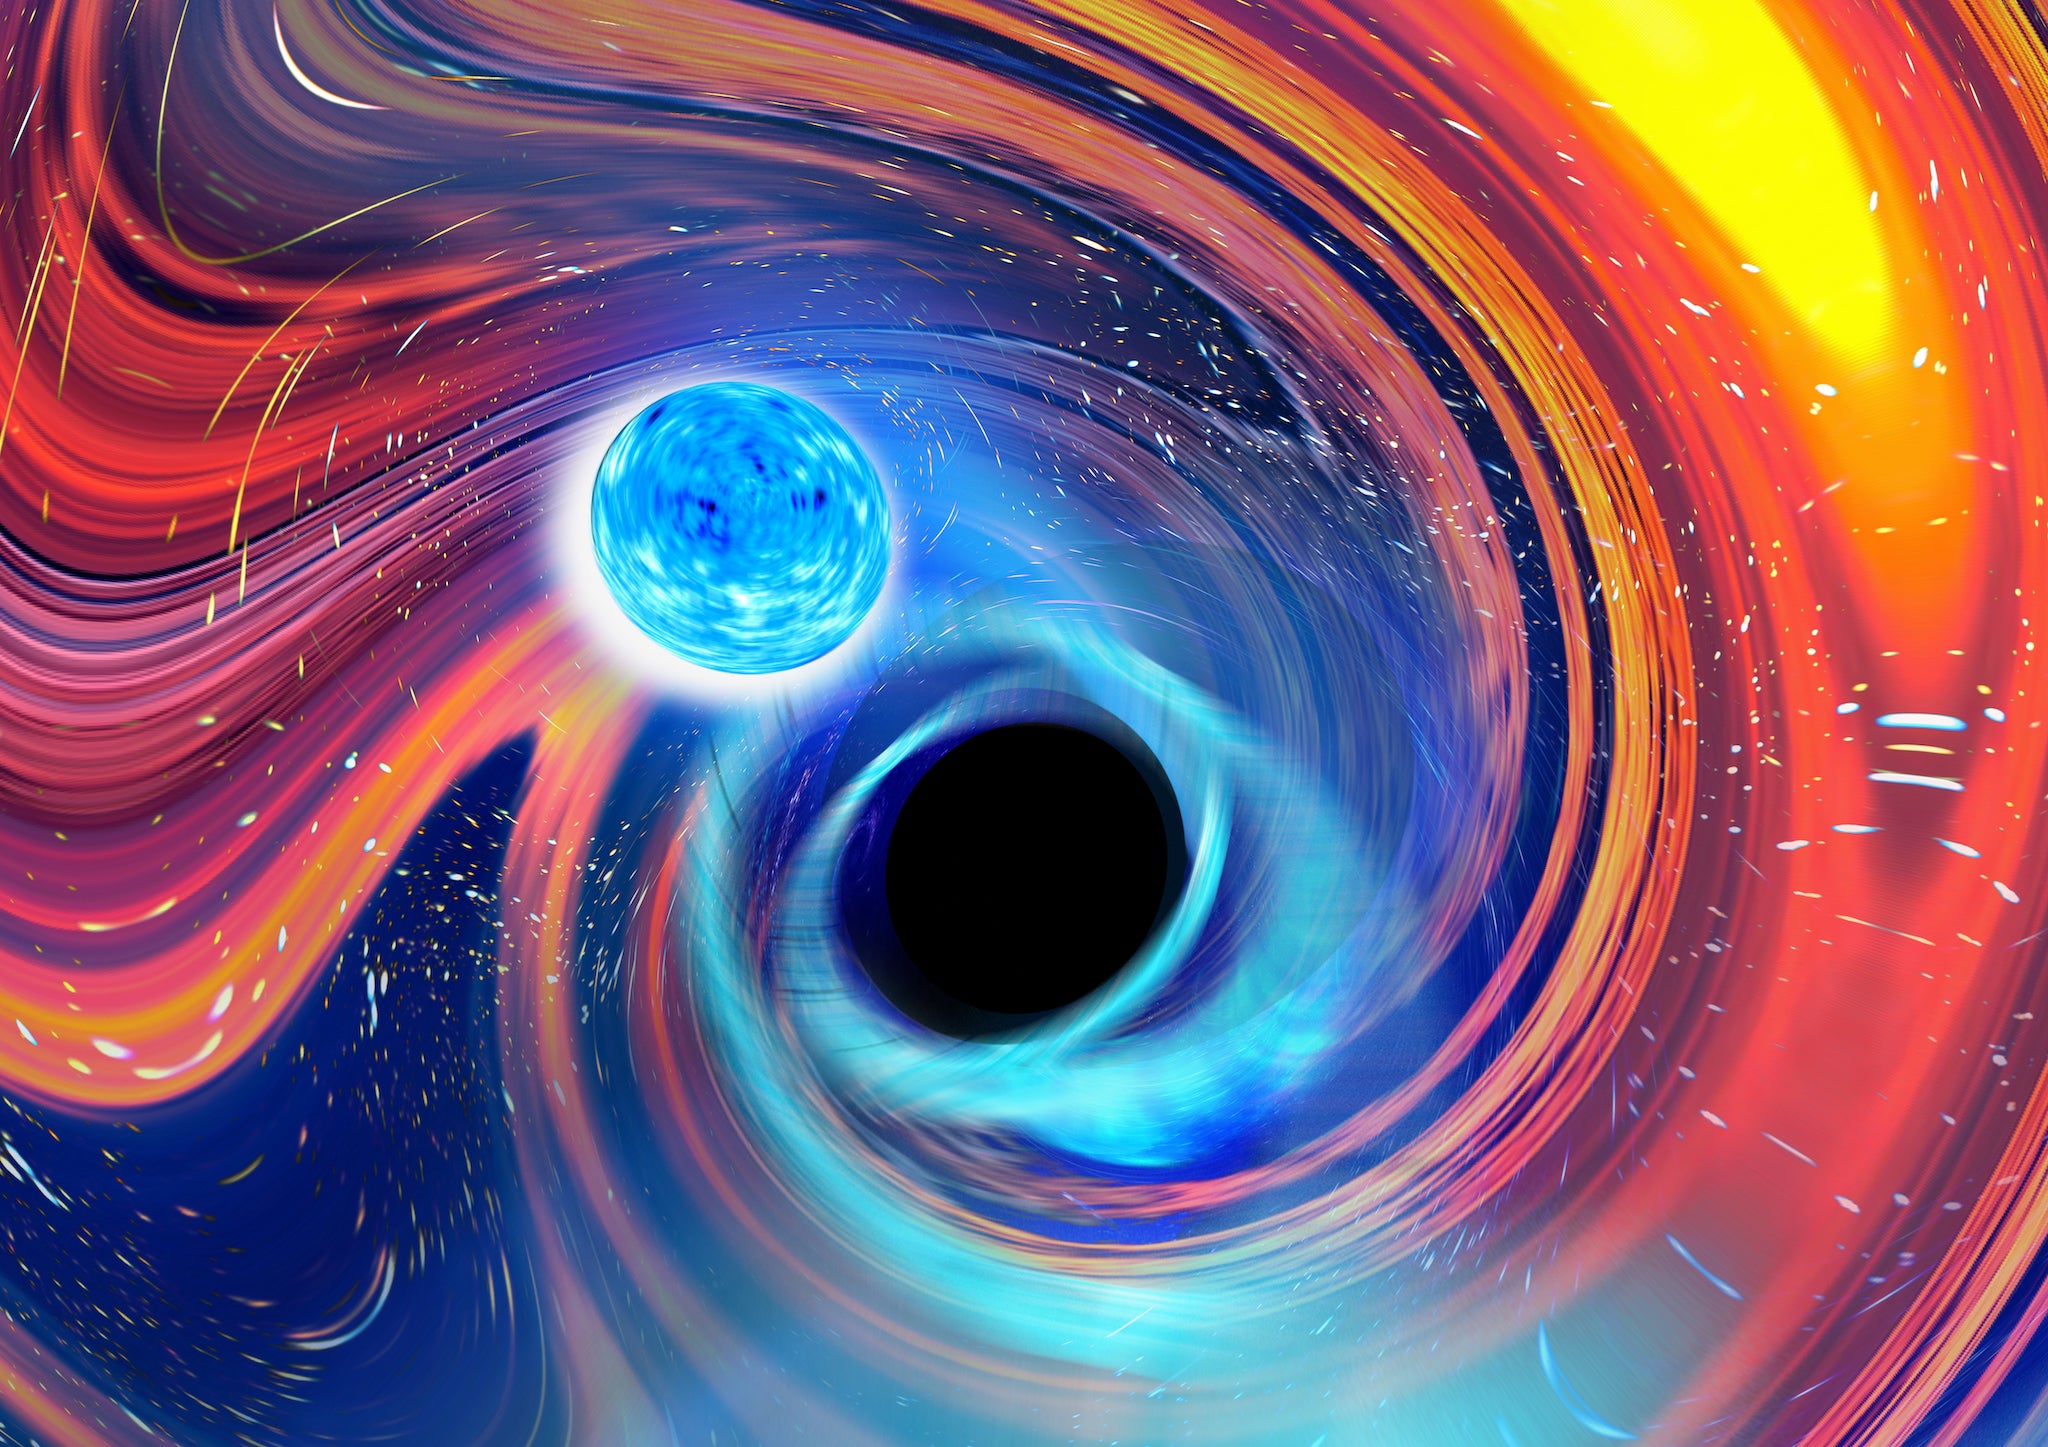 Rainbow Swirl is an artistic image inspired by a Black Hole Neutron Star merger event